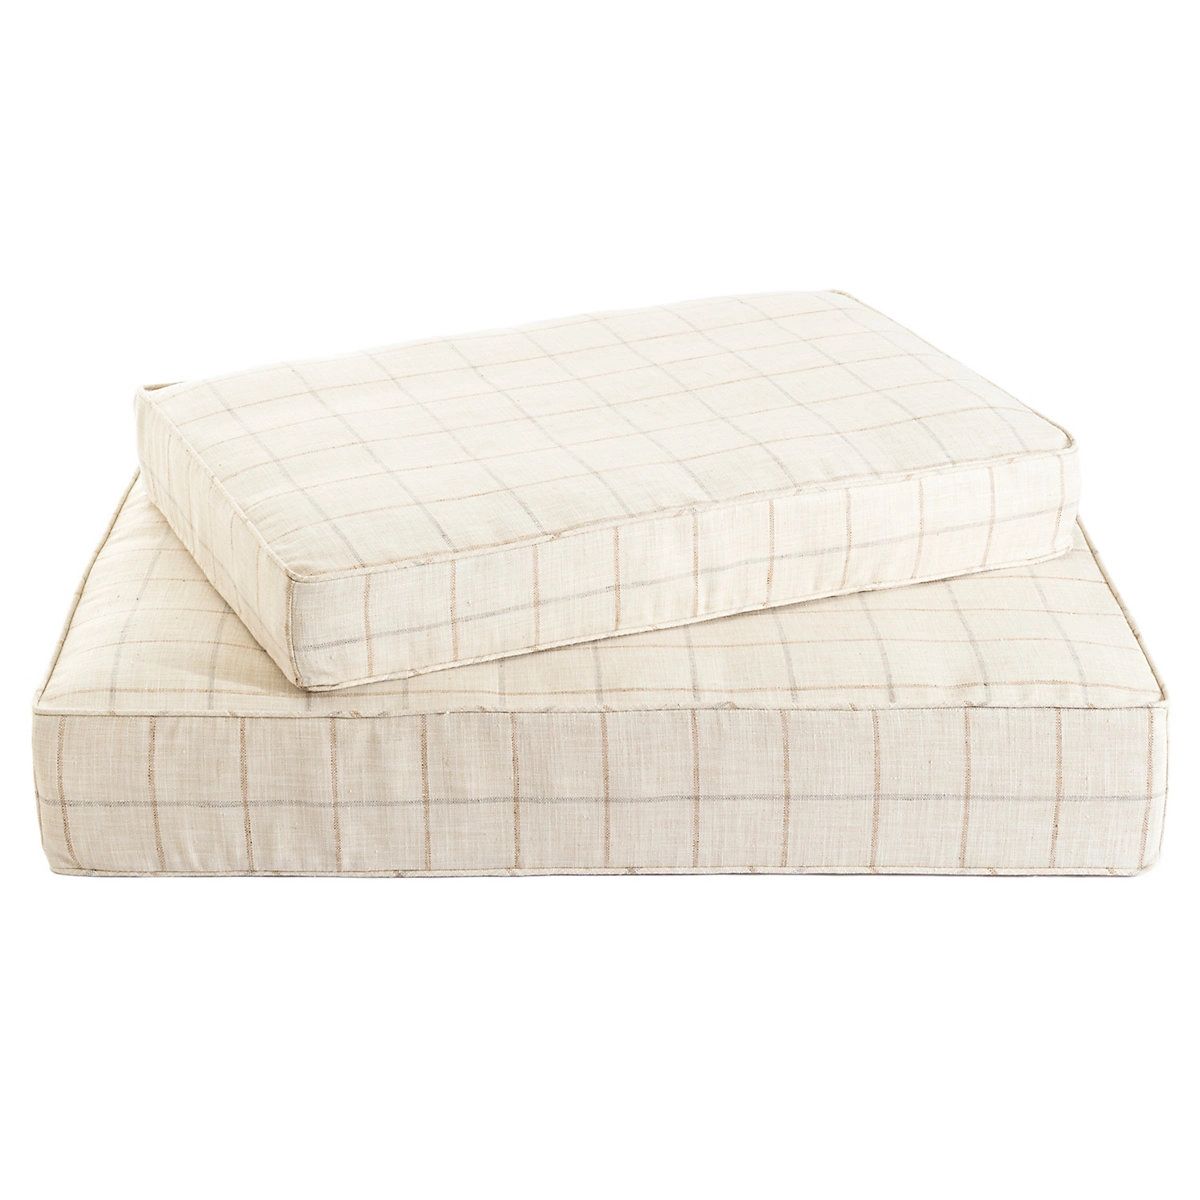 Chatham Tattersall Natural/Grey Dog Bed | Annie Selke